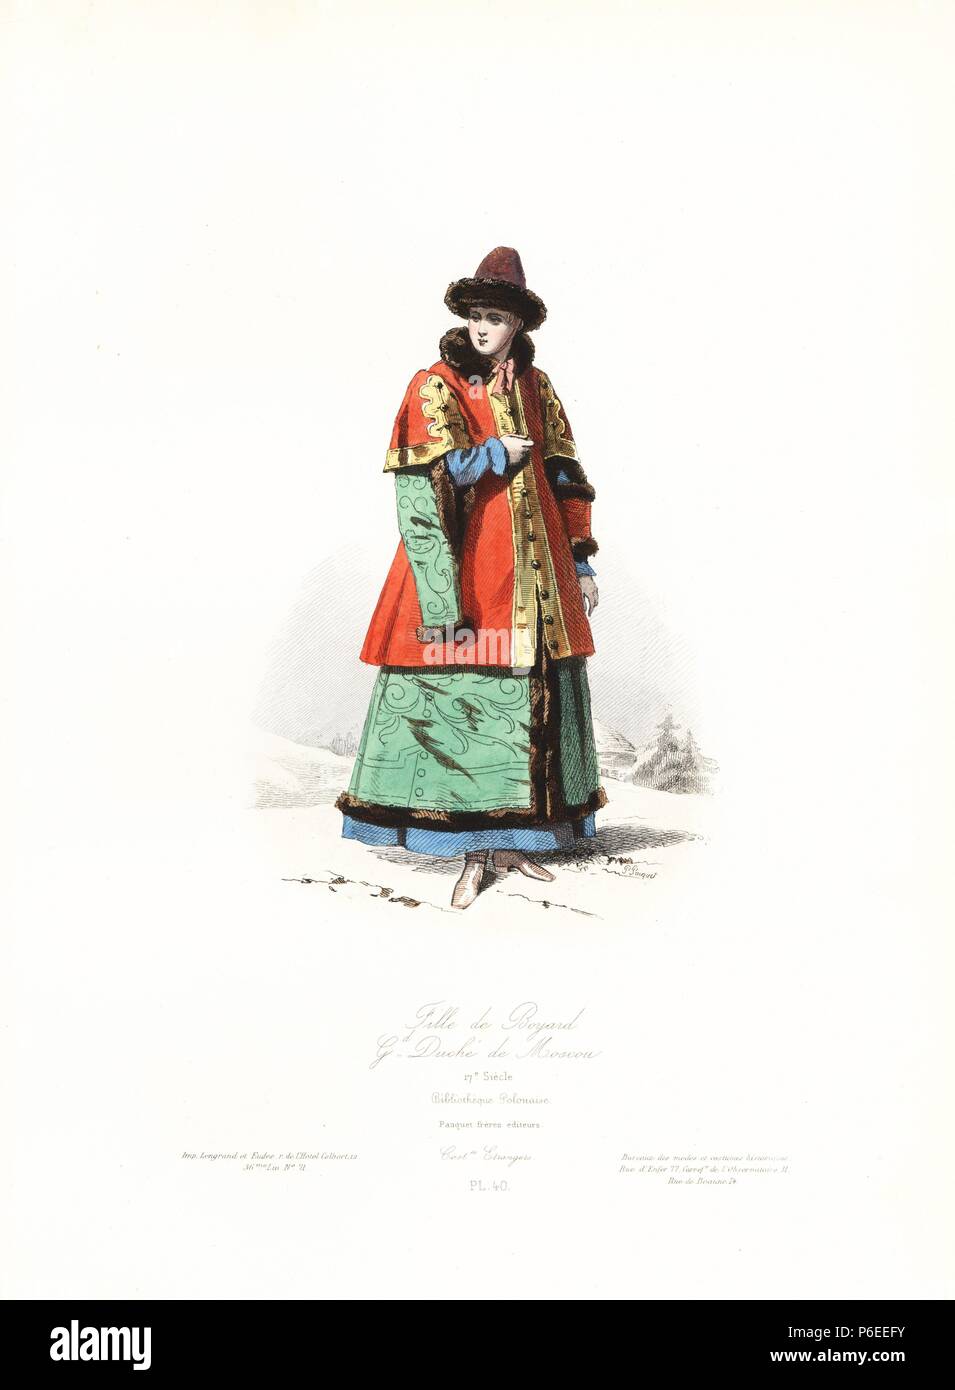 Boyar girl, Grand Duchy of Moscow, 17th century, Polish Library. Handcoloured steel engraving by Polydor Pauquet from the Pauquet Brothers' 'Modes et Costumes Etrangers Anciens et Modernes' (Foreign Fashions and Costumes Ancient and Modern), Paris, 1865. Hippolyte (b. 1797) and Polydor Pauquet (b. 1799) ran a successful publishing house in Paris in the 19th century, specializing in illustrated books on costume, birds, butterflies, anatomy and natural history. Stock Photo